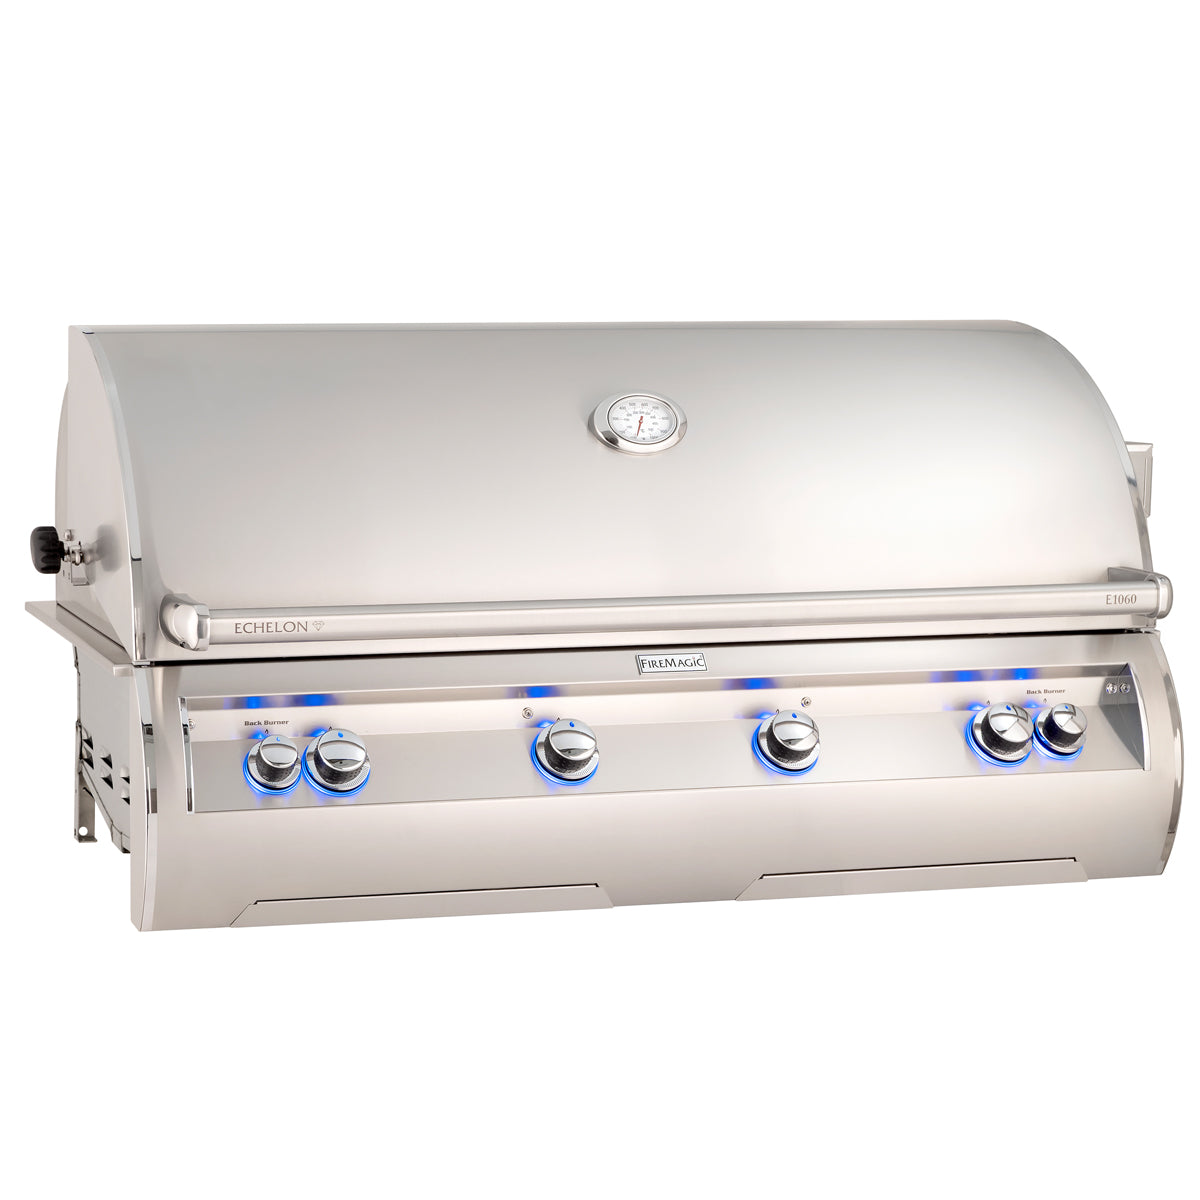 Fire Magic Echelon E1060i Built In Grill With Analog Thermometer